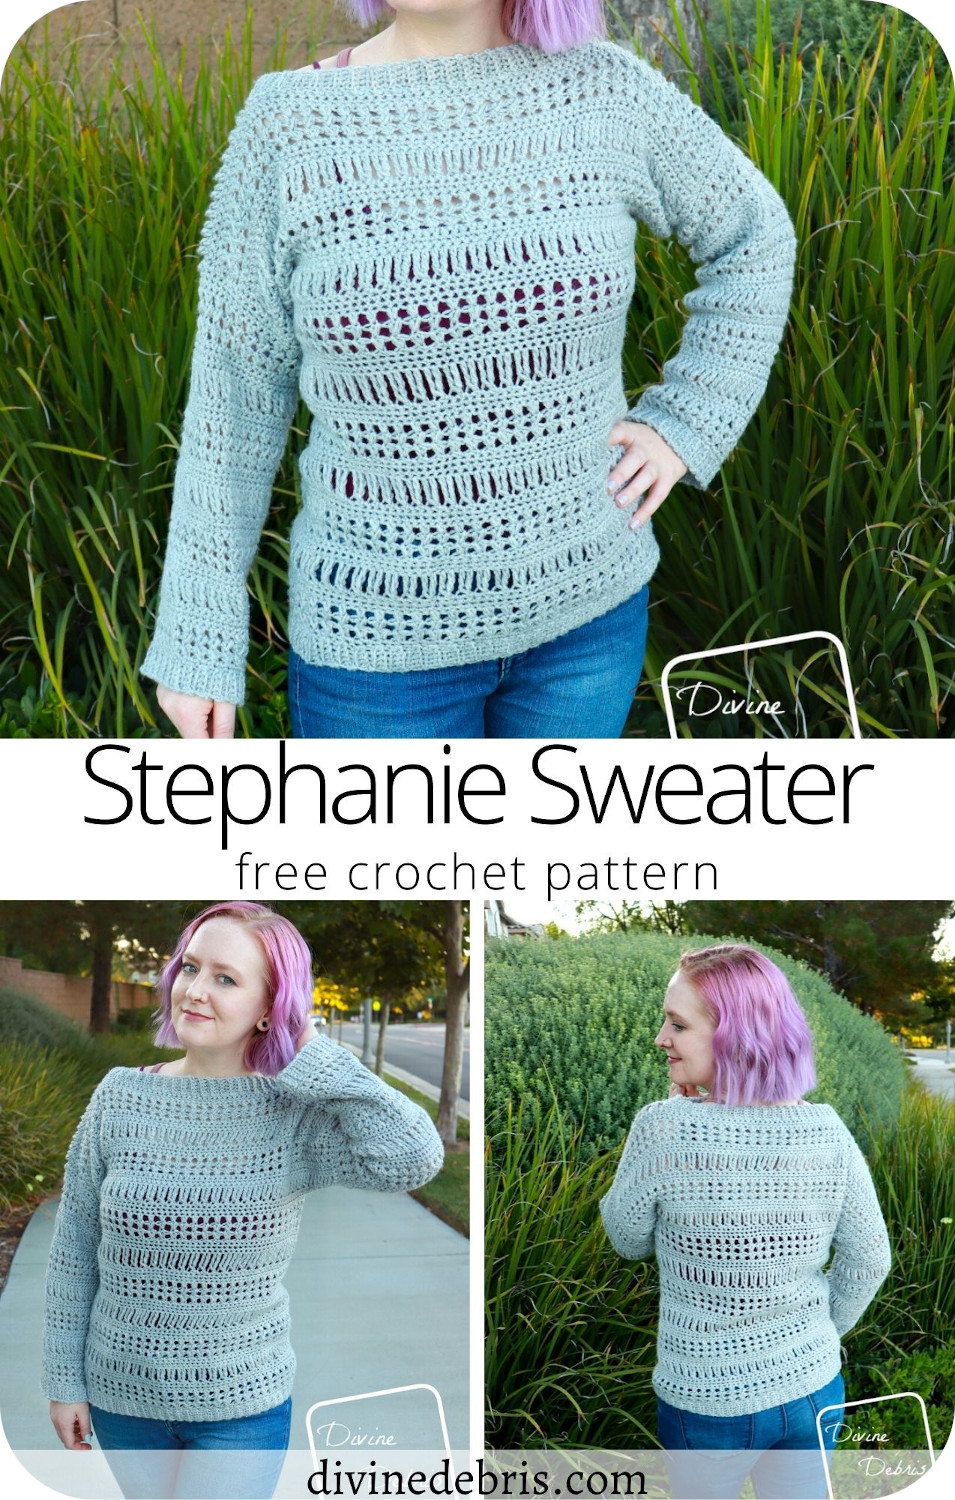 Learn to make a fun and easy early Fall pullover, the Stephanie Sweater, from a free crochet pattern on DivineDebris.com